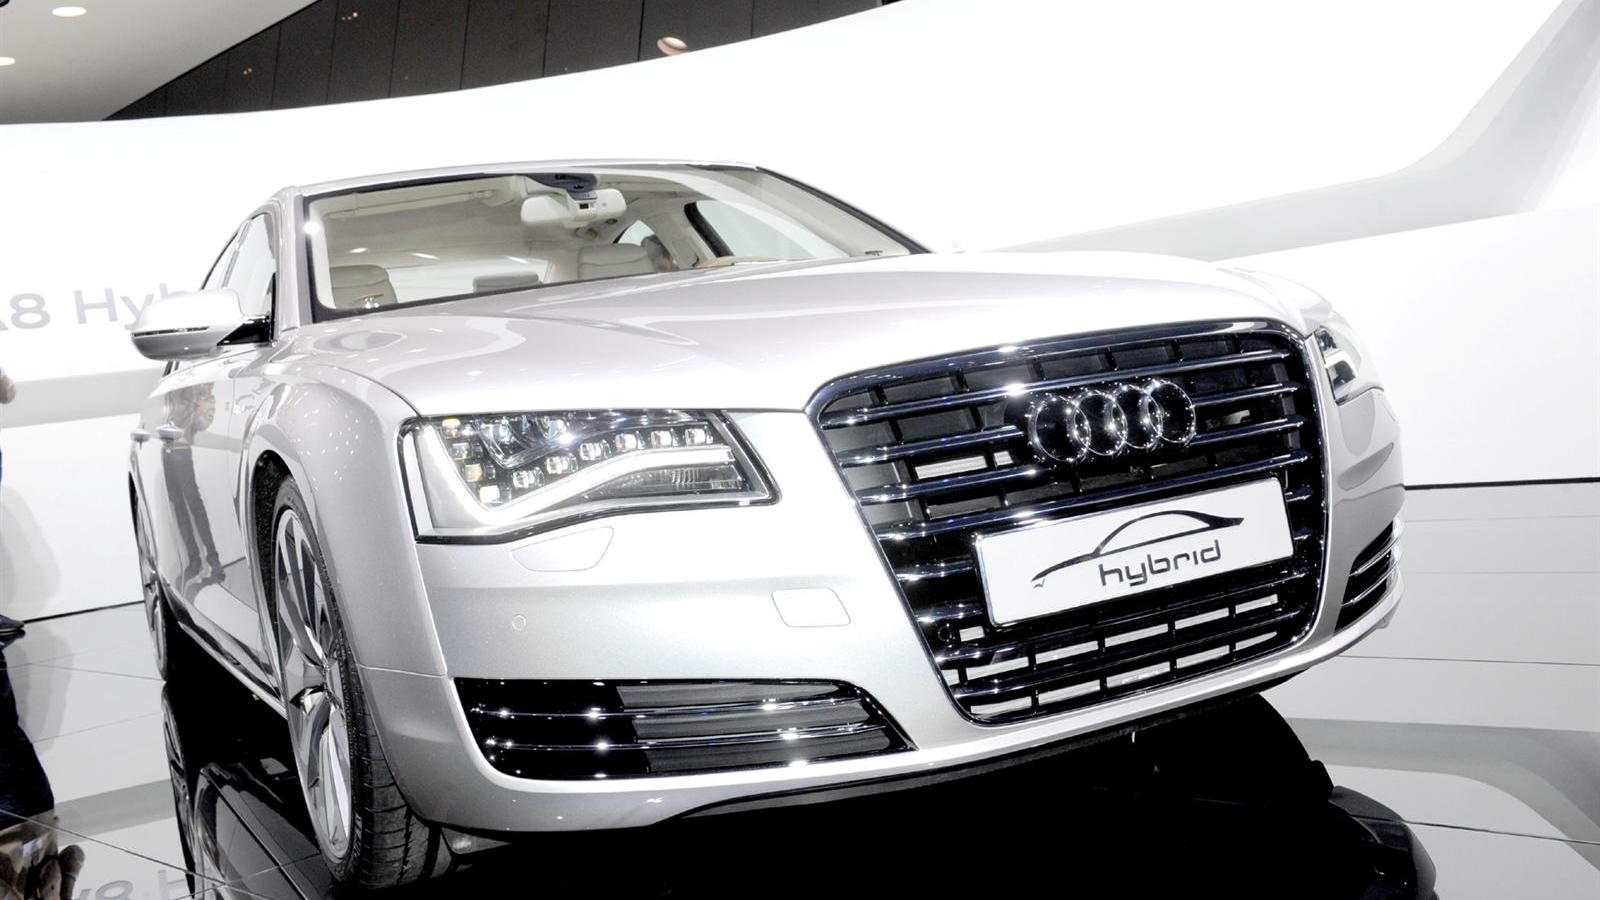 2012 Audi A8 Hybrid live in Geneva. Photos © United Pictures, Int'l.